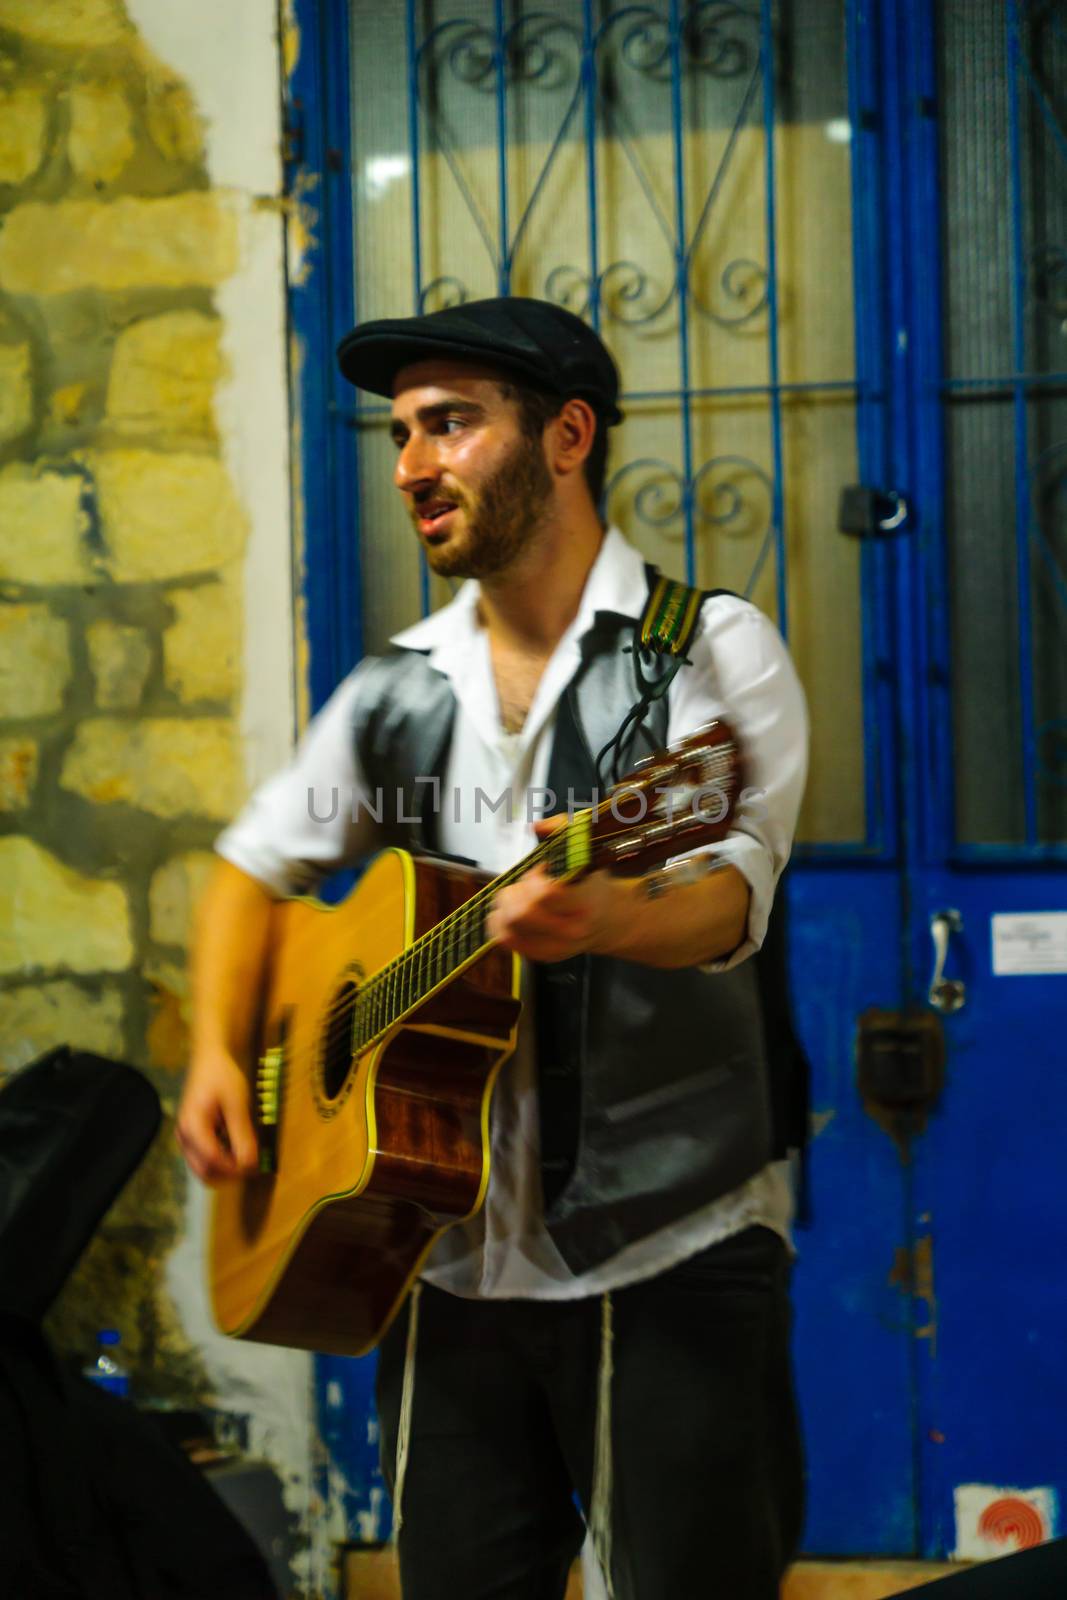 SAFED, ISRAEL - AUGUST 23, 2017: Scene of the Klezmer Festival, with street musician playing, in Safed (Tzfat), Israel. Its the 30th annual traditional Jewish festival in the public streets of Safed